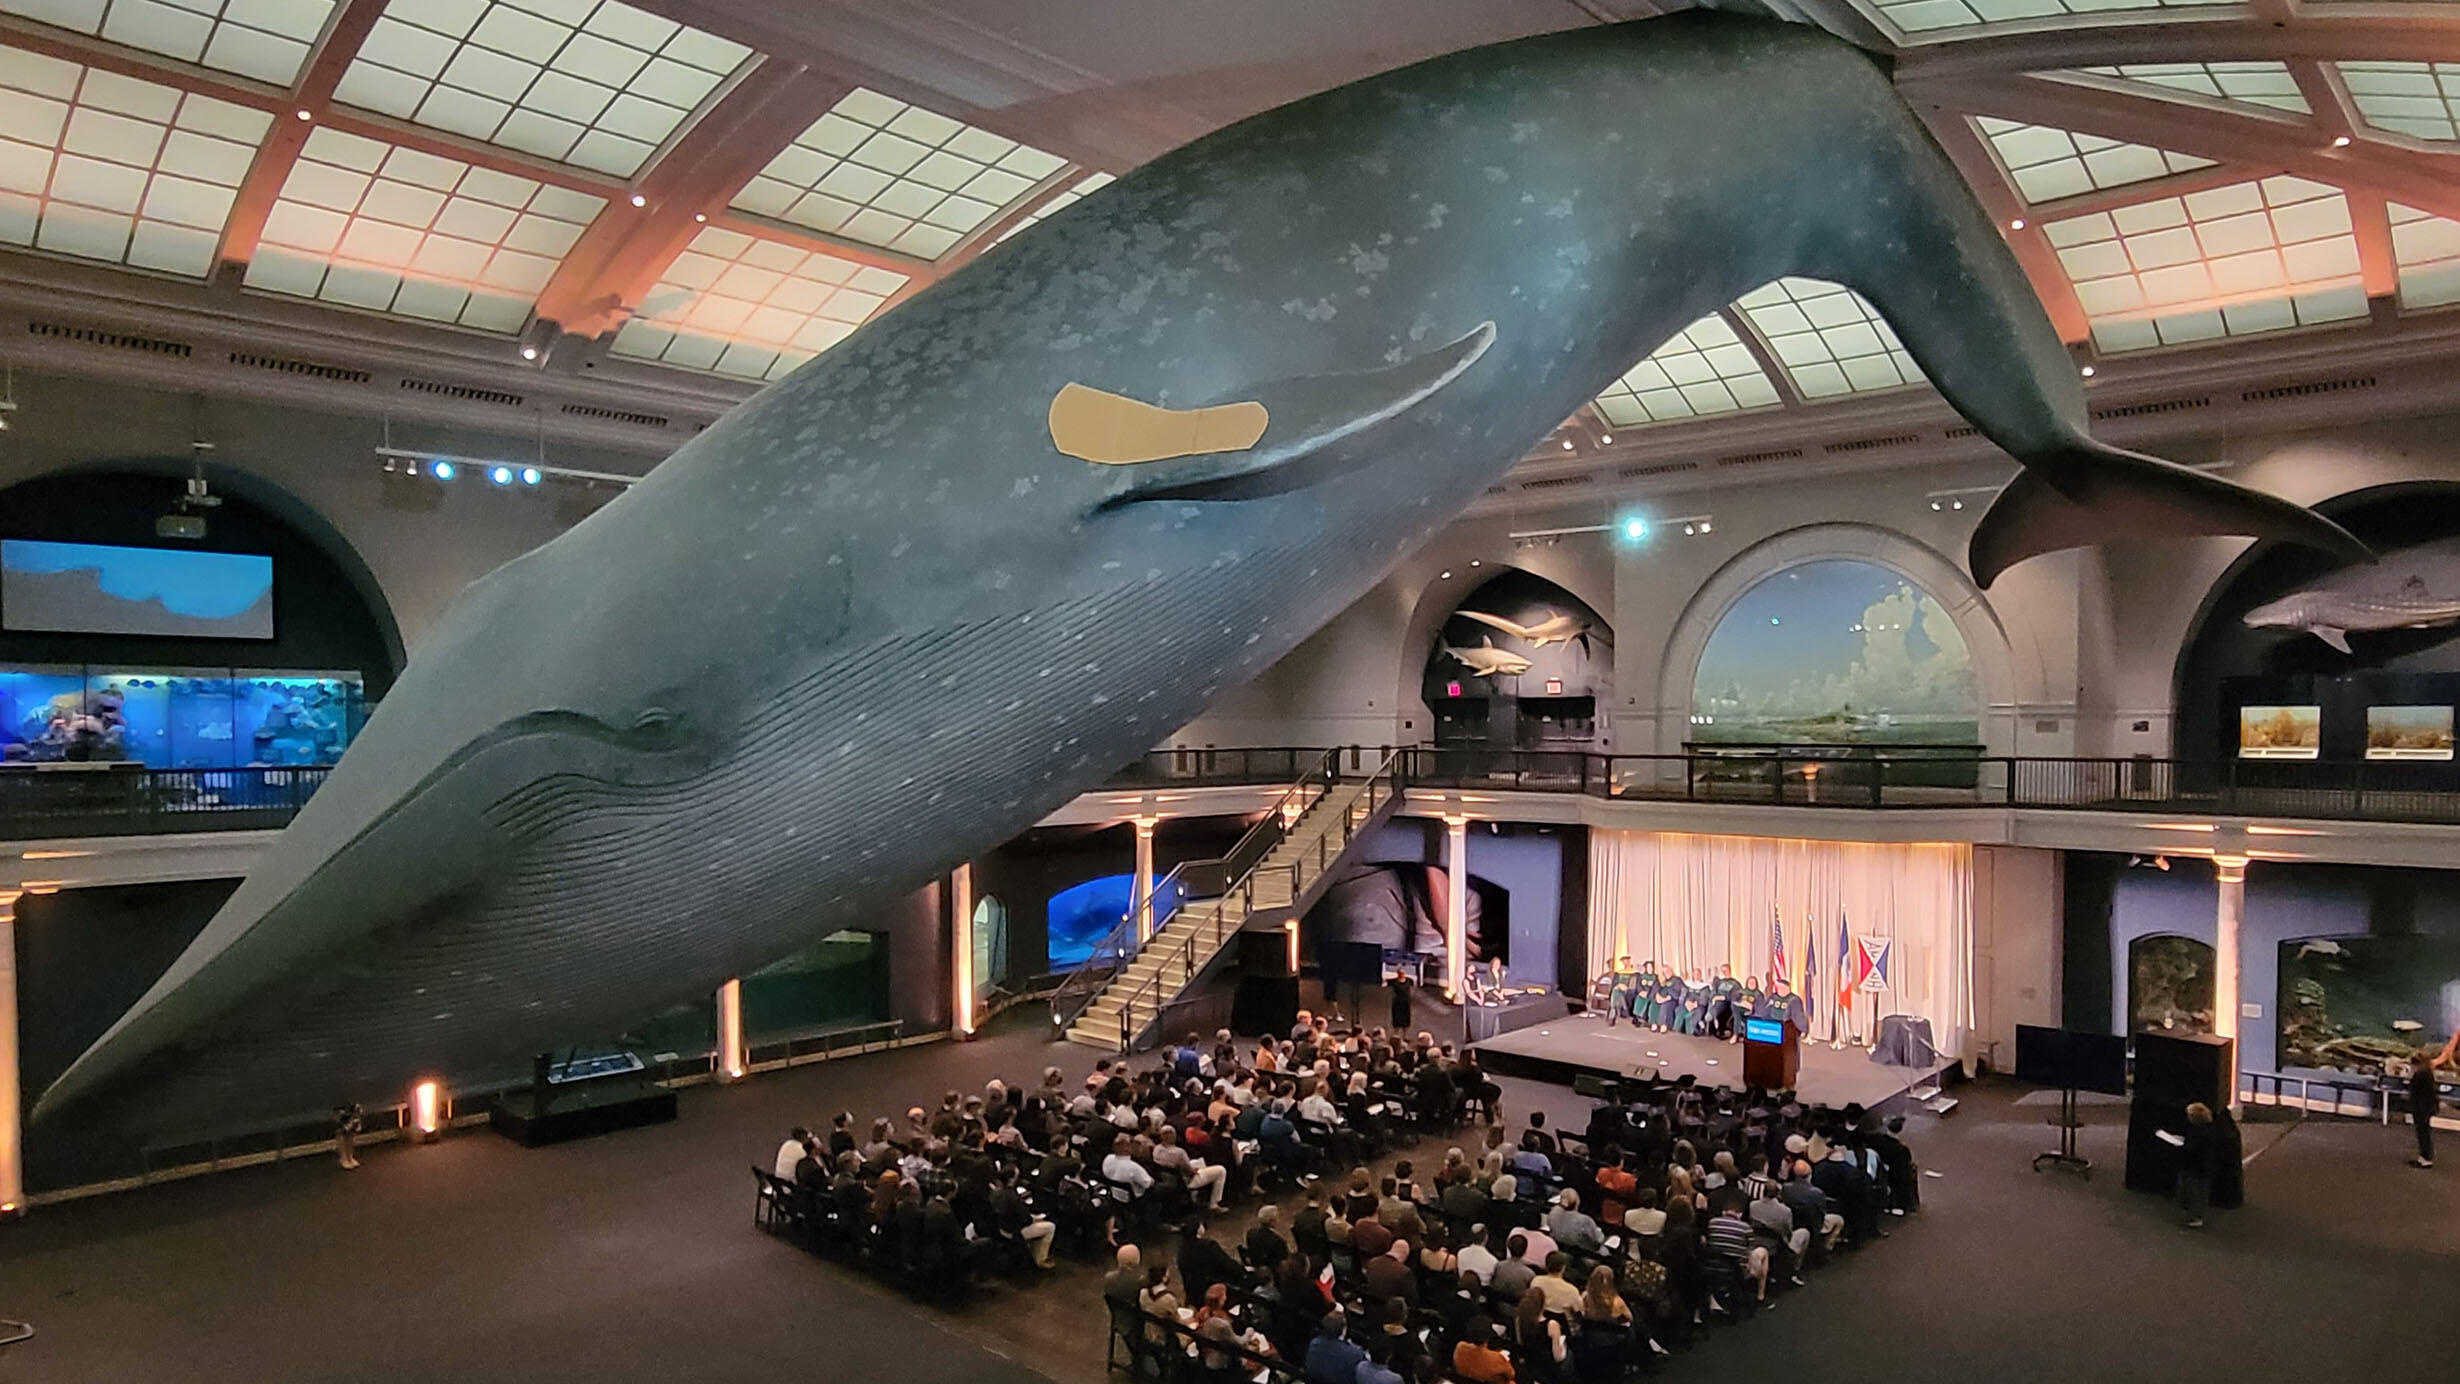 Rows of spectators sit beneath the blue whale and view RGGS graduates seated on a stage in the Milstein Hall of Ocean Life.